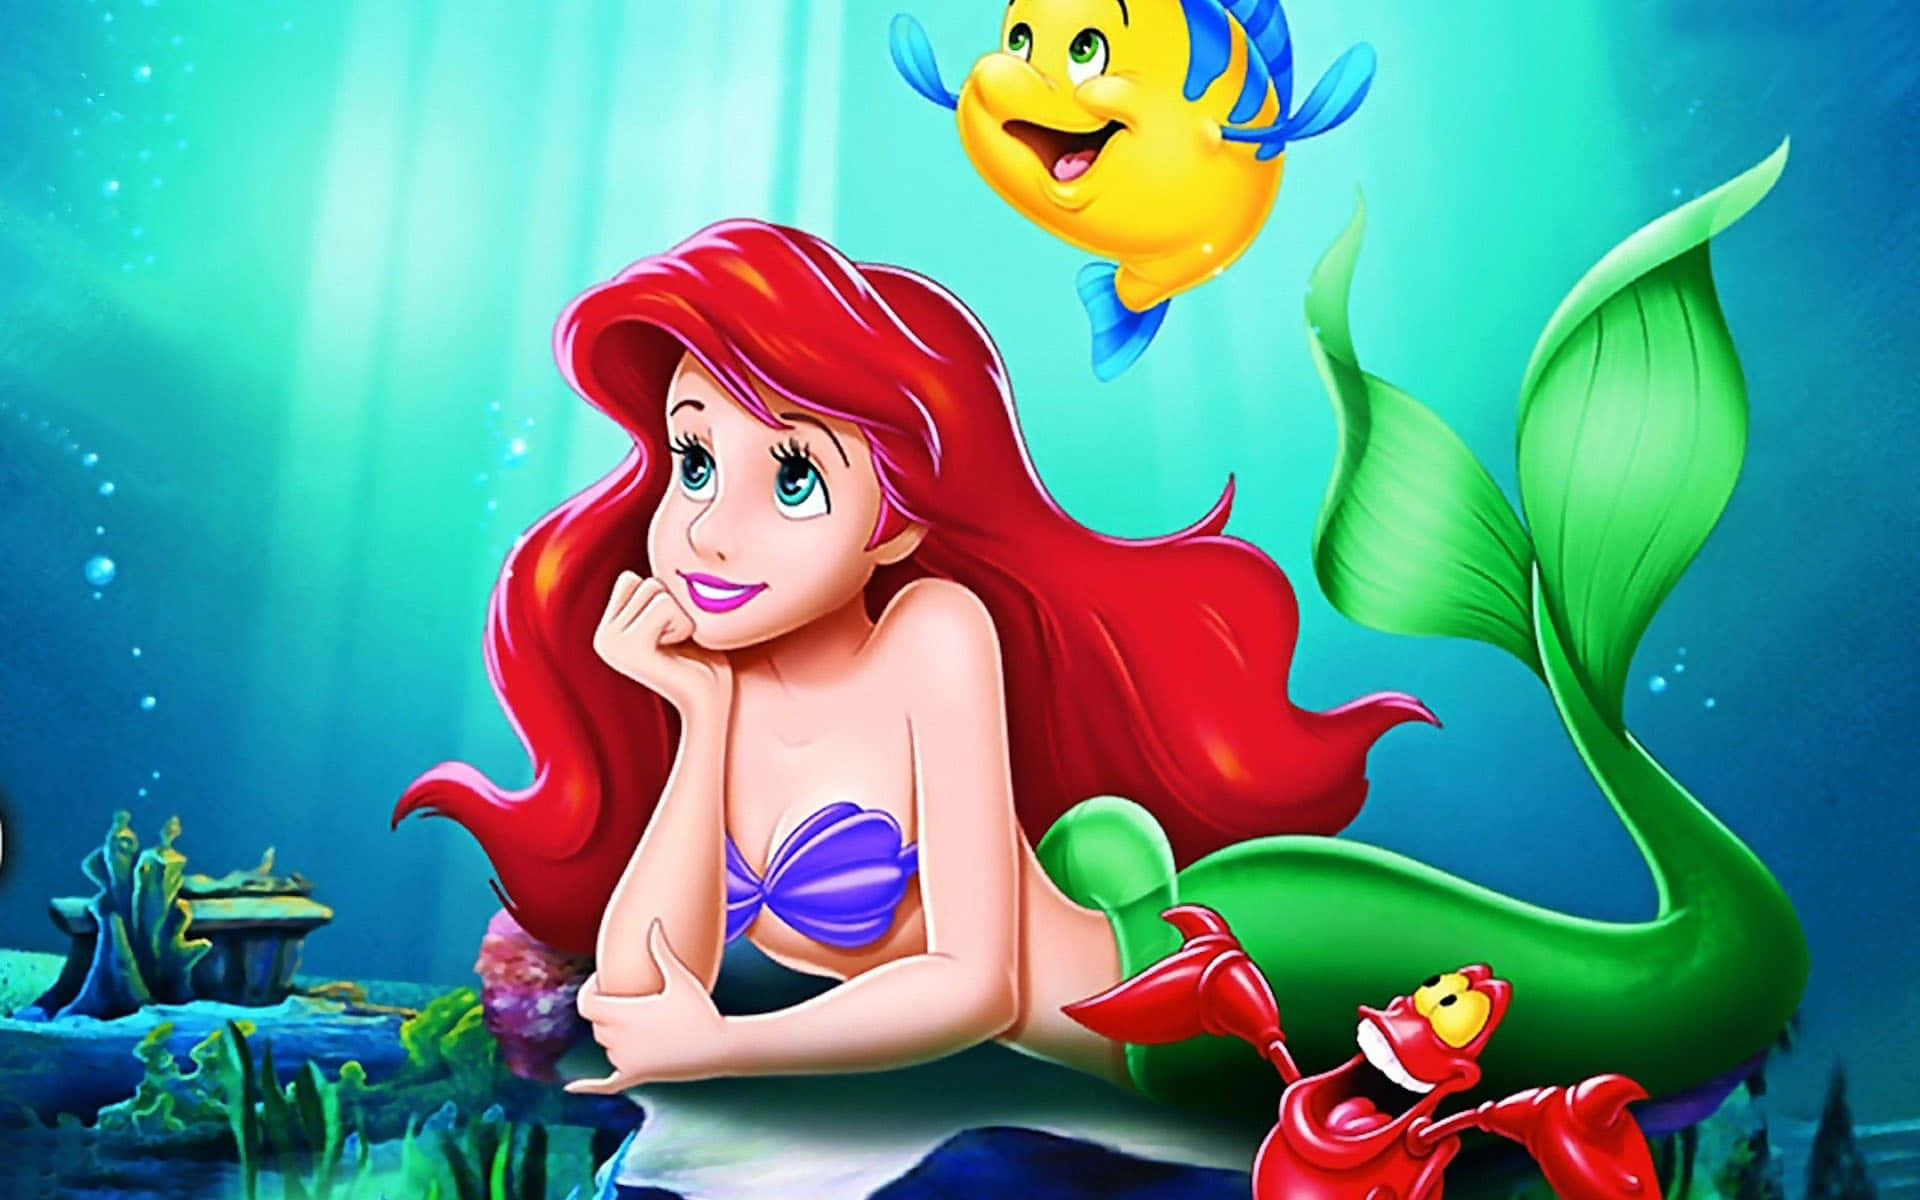 Ariel, the Little Mermaid wishing upon a star.